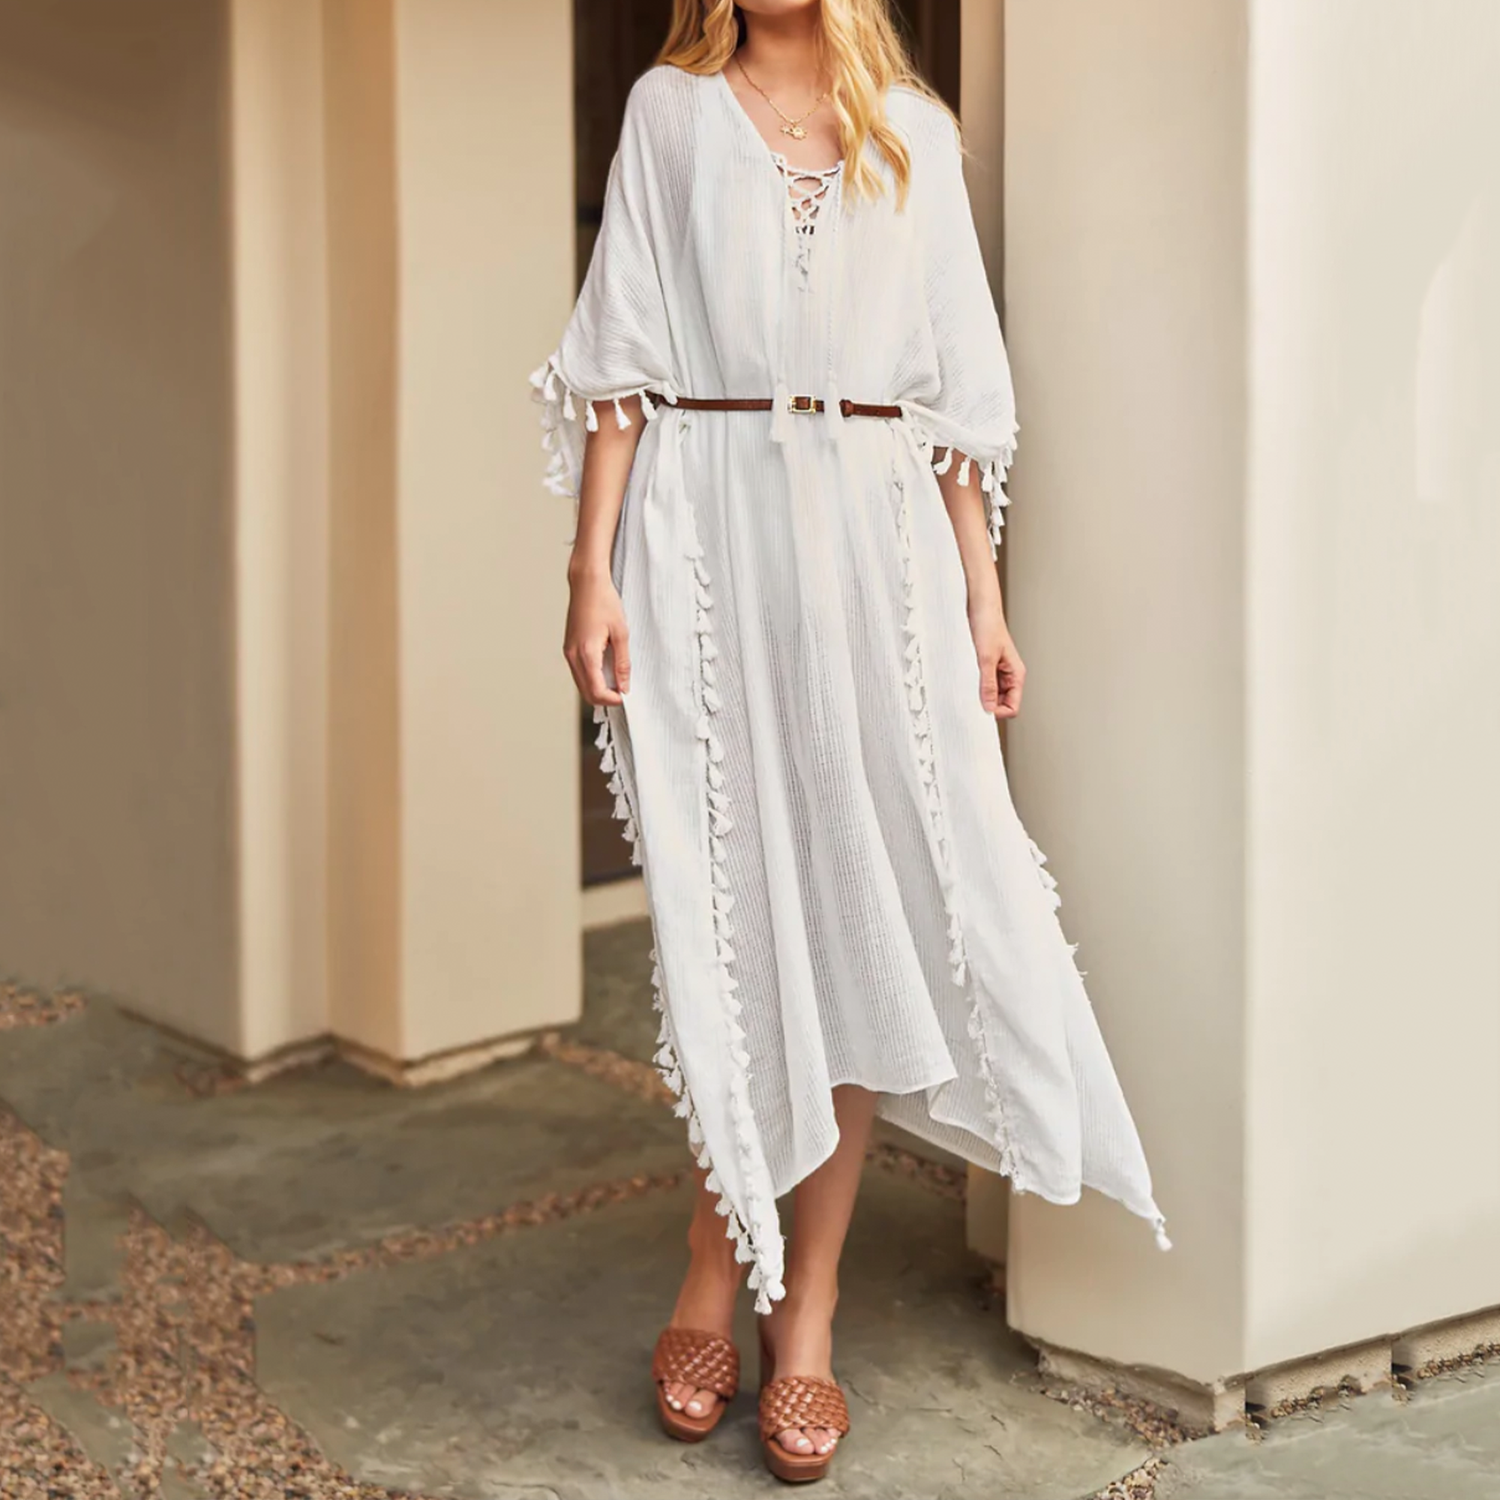 Walter Baker Acapulco Kaftan. Toss this kaftan over your swimsuit for a glam poolside look, then dress up with accessories for dinner and drinks!